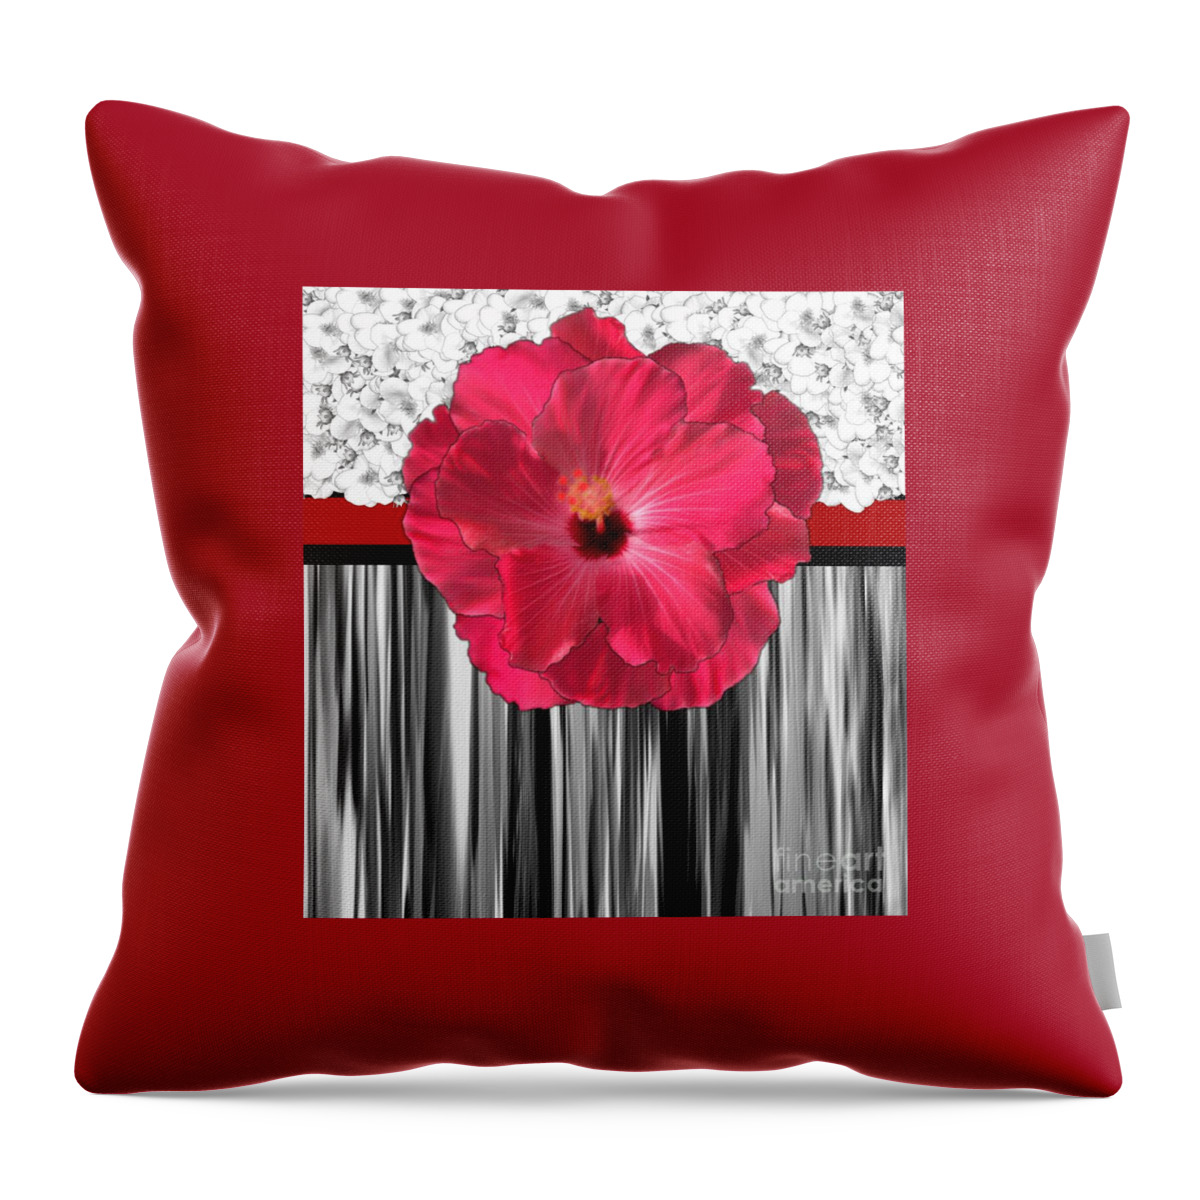 Pink Throw Pillow featuring the digital art Pink, Lily Motif by Delynn Addams